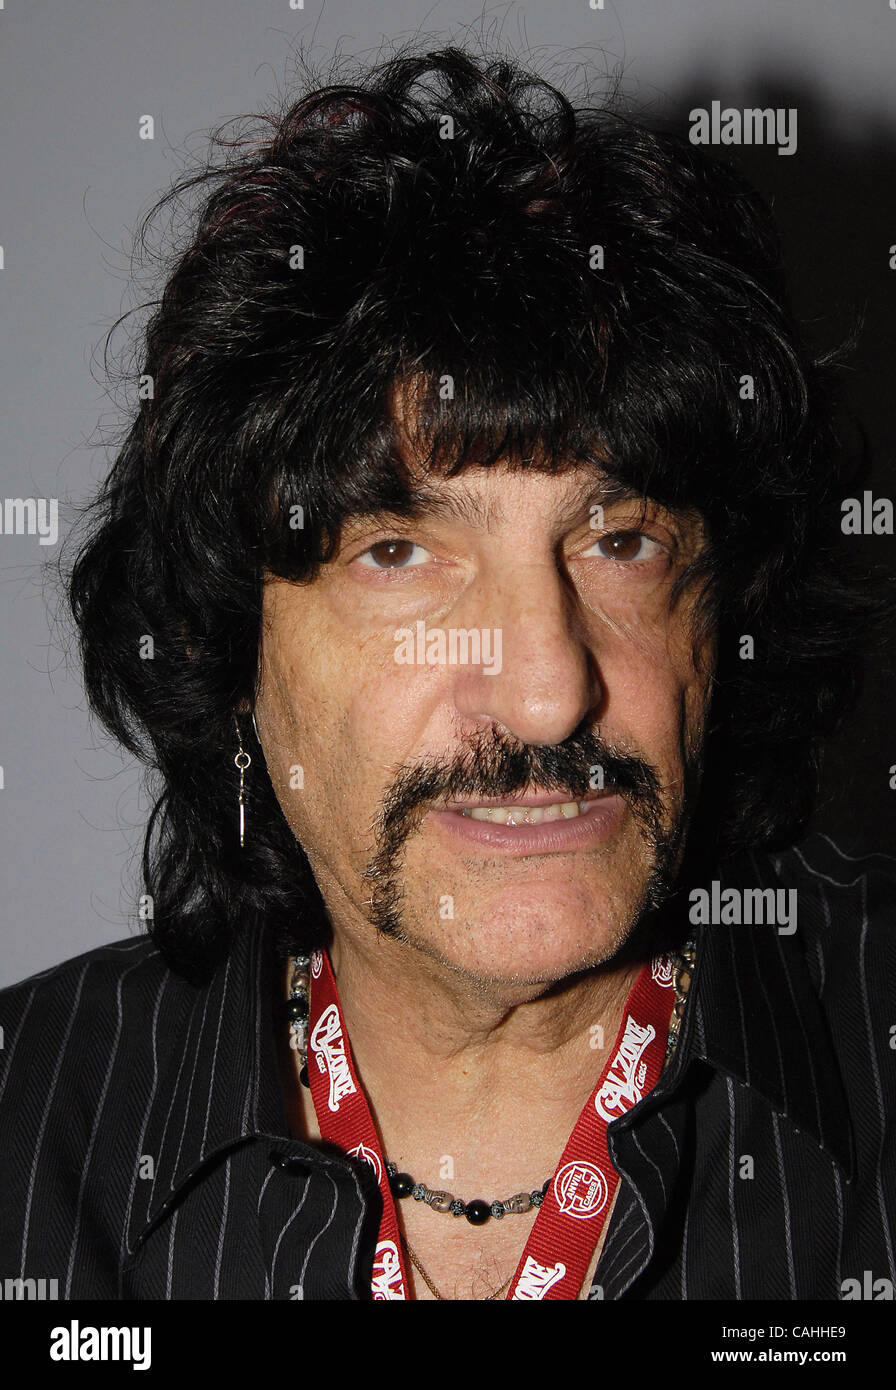 January 19, 2008; Anaheim, CA, USA; Musician CARMINE APPICE at the Gibson Guitar during The 2008 NAMM Show at the Anaheim Convention Center. Mandatory Credit: Photo by Vaughn Youtz/ZUMA Press. (©) Copyright 2007 by Vaughn Youtz. Stock Photo